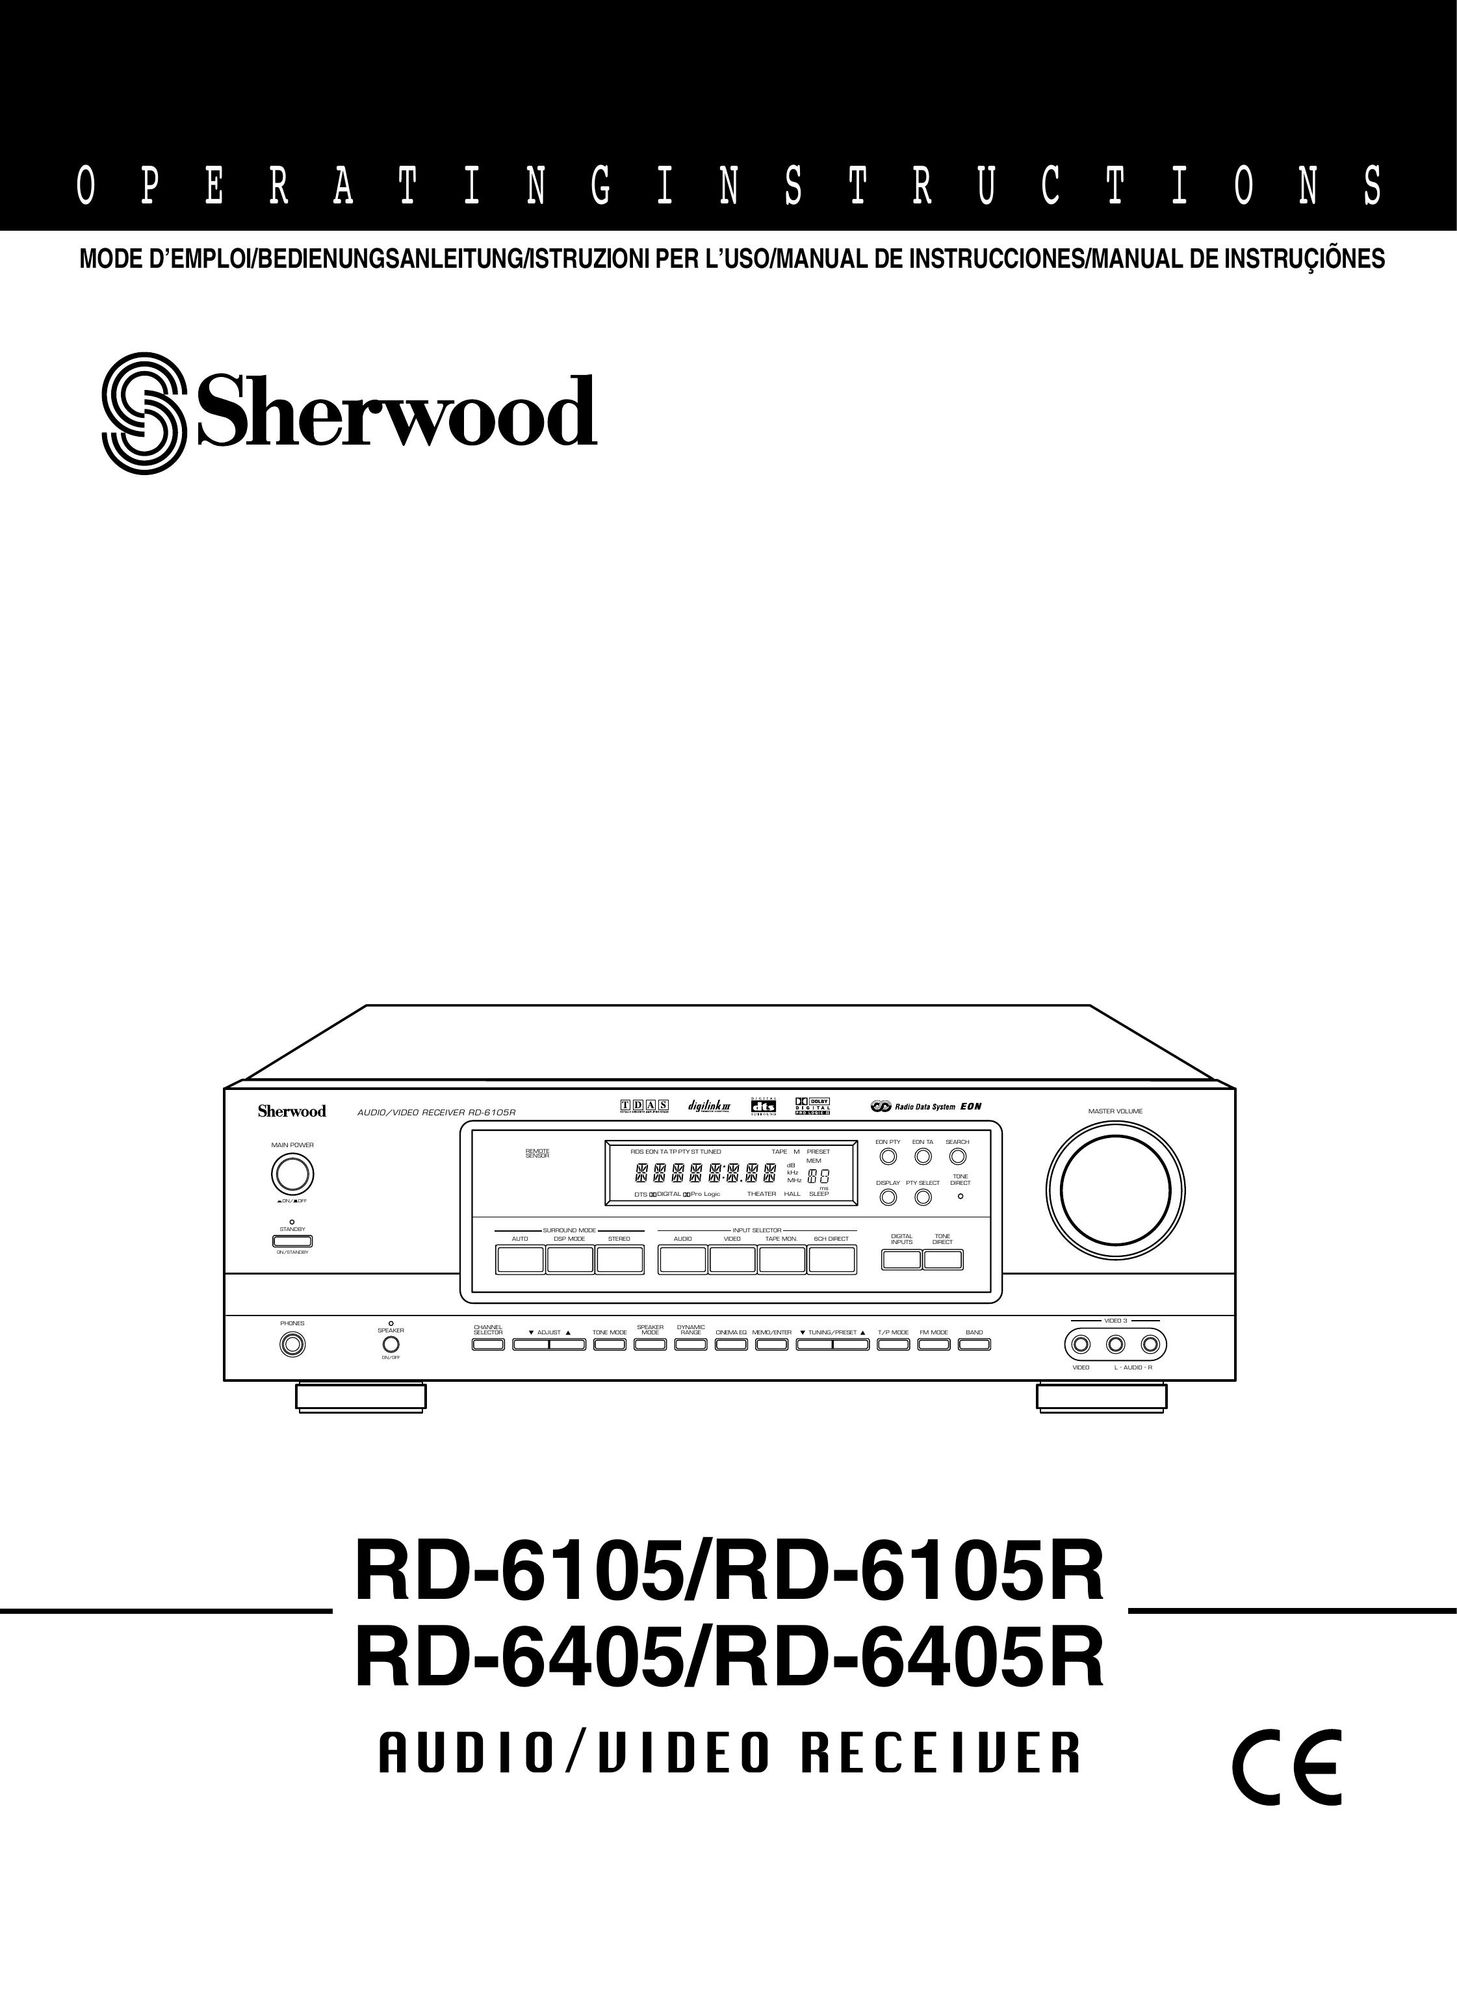 Sherwood RD-6405 Stereo Receiver User Manual